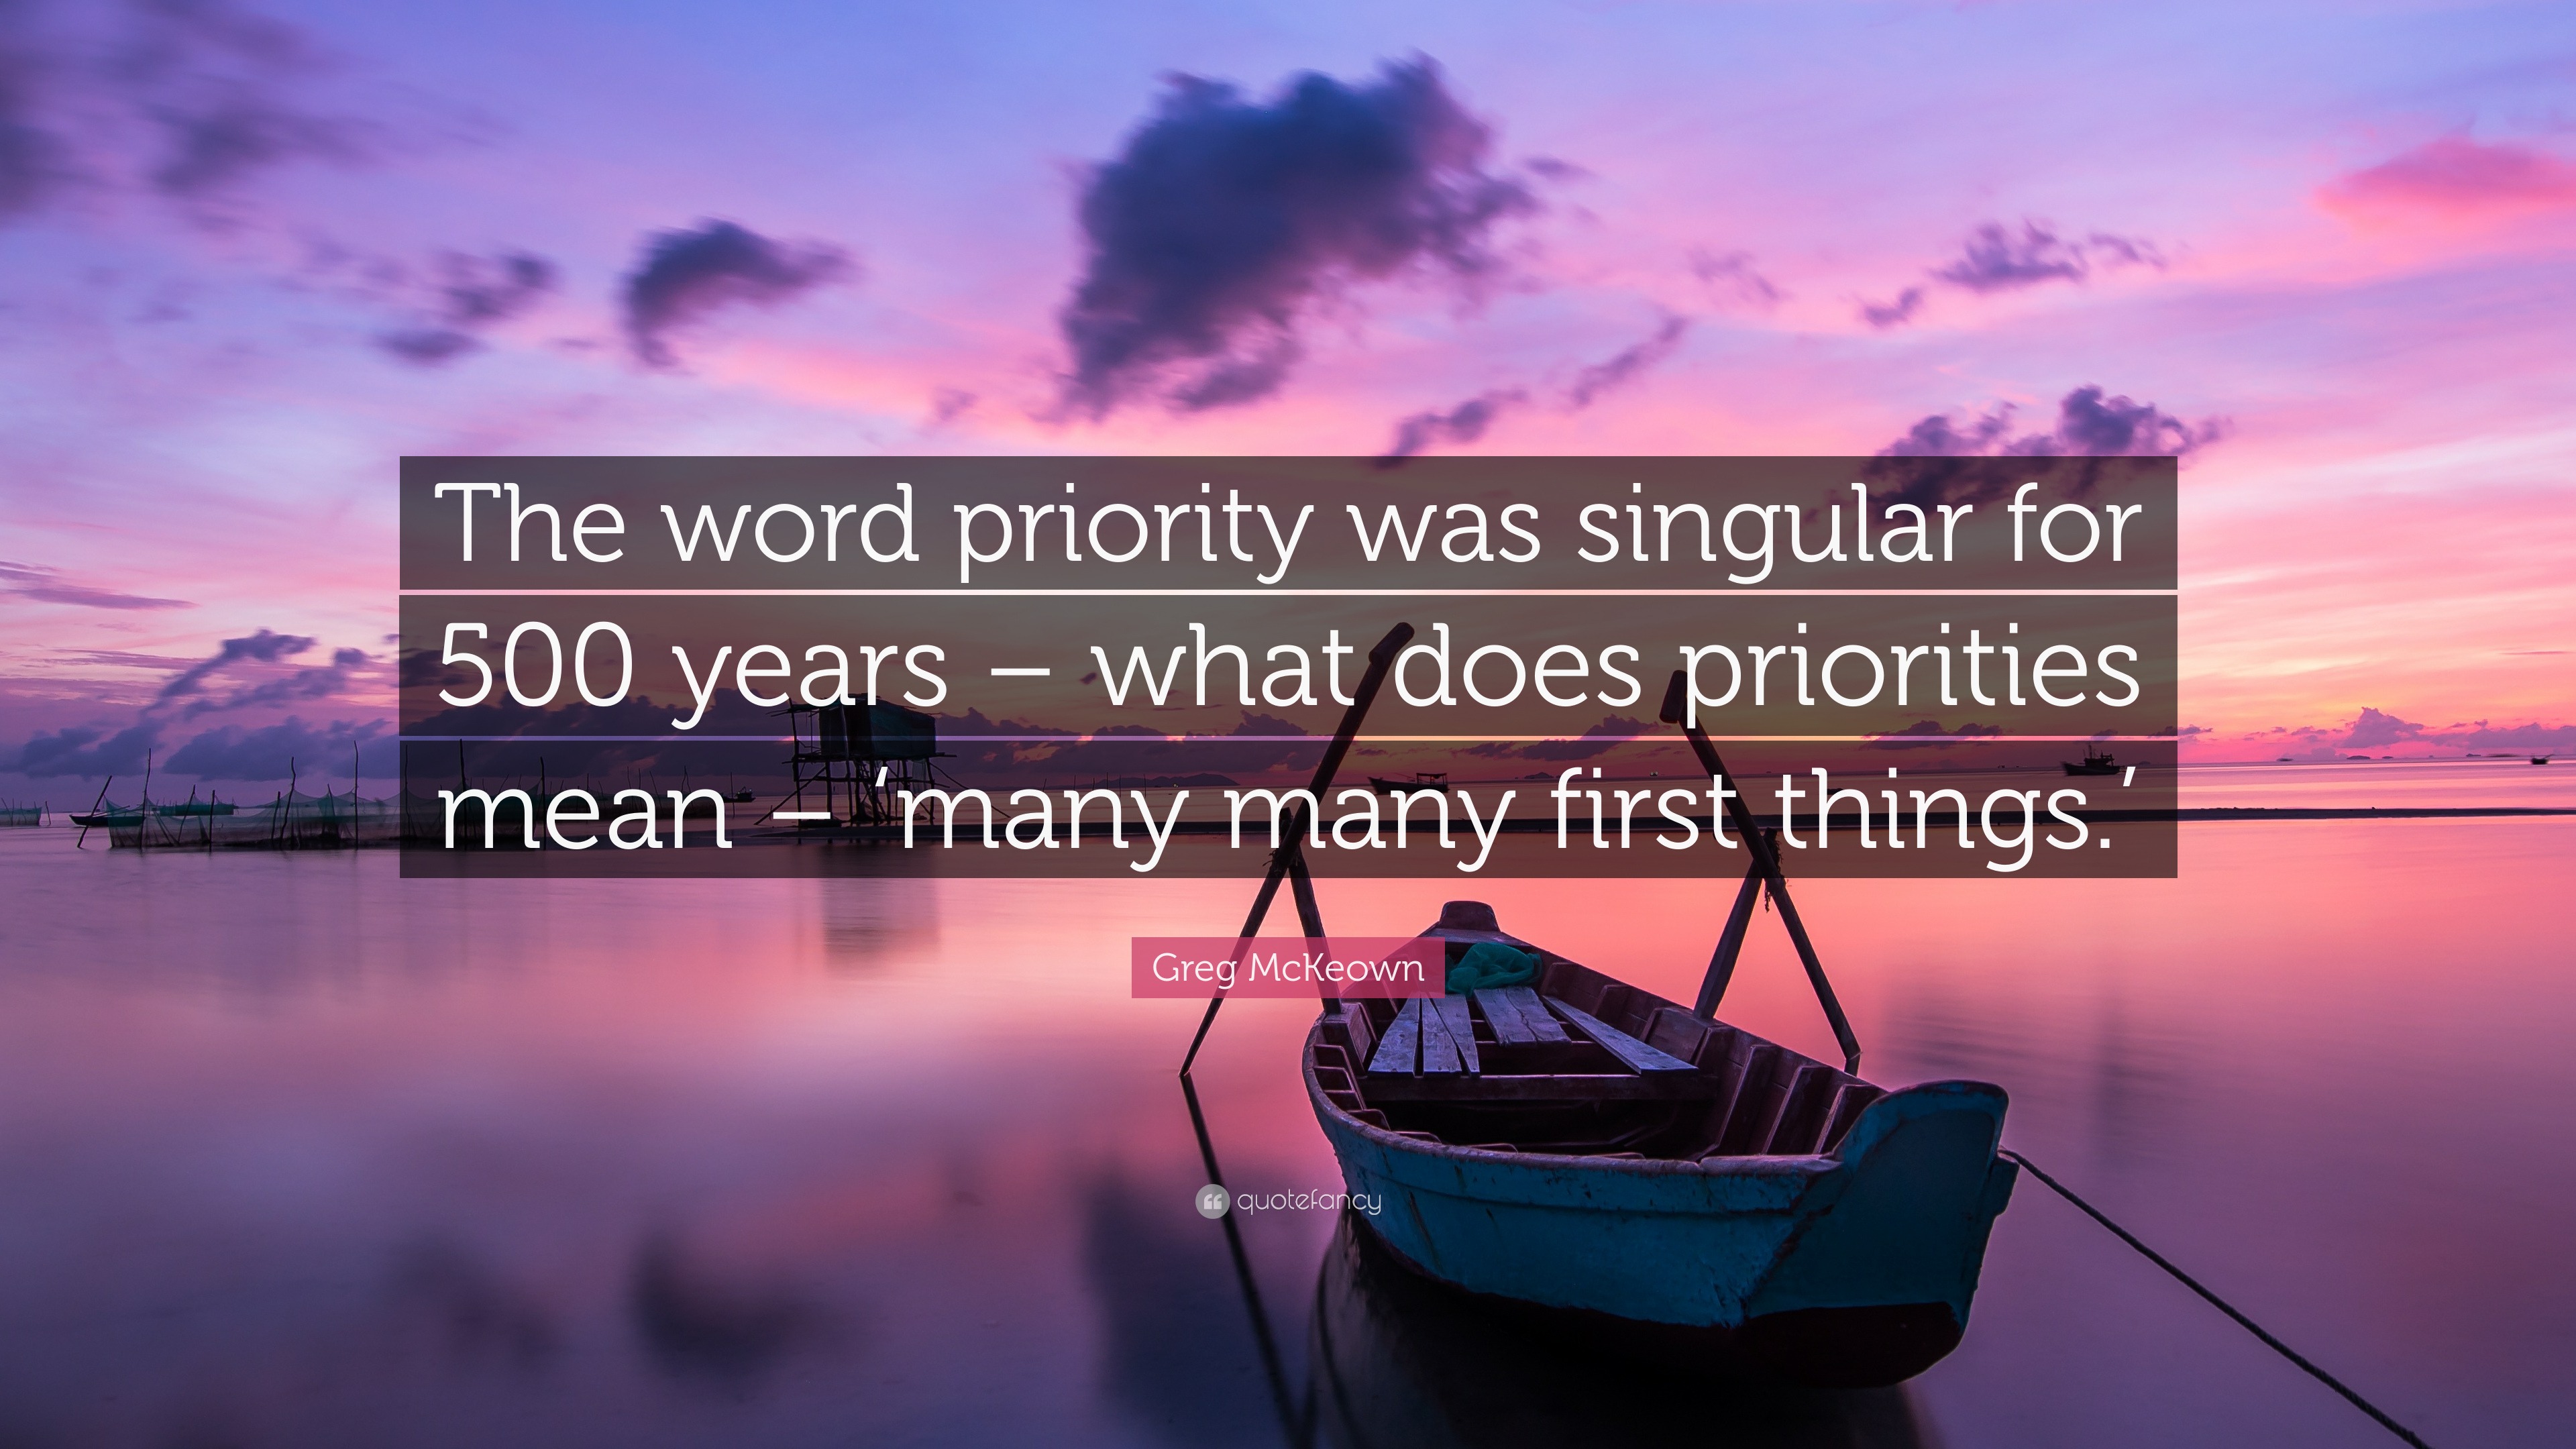 greg-mckeown-quote-the-word-priority-was-singular-for-500-years-what-does-priorities-mean